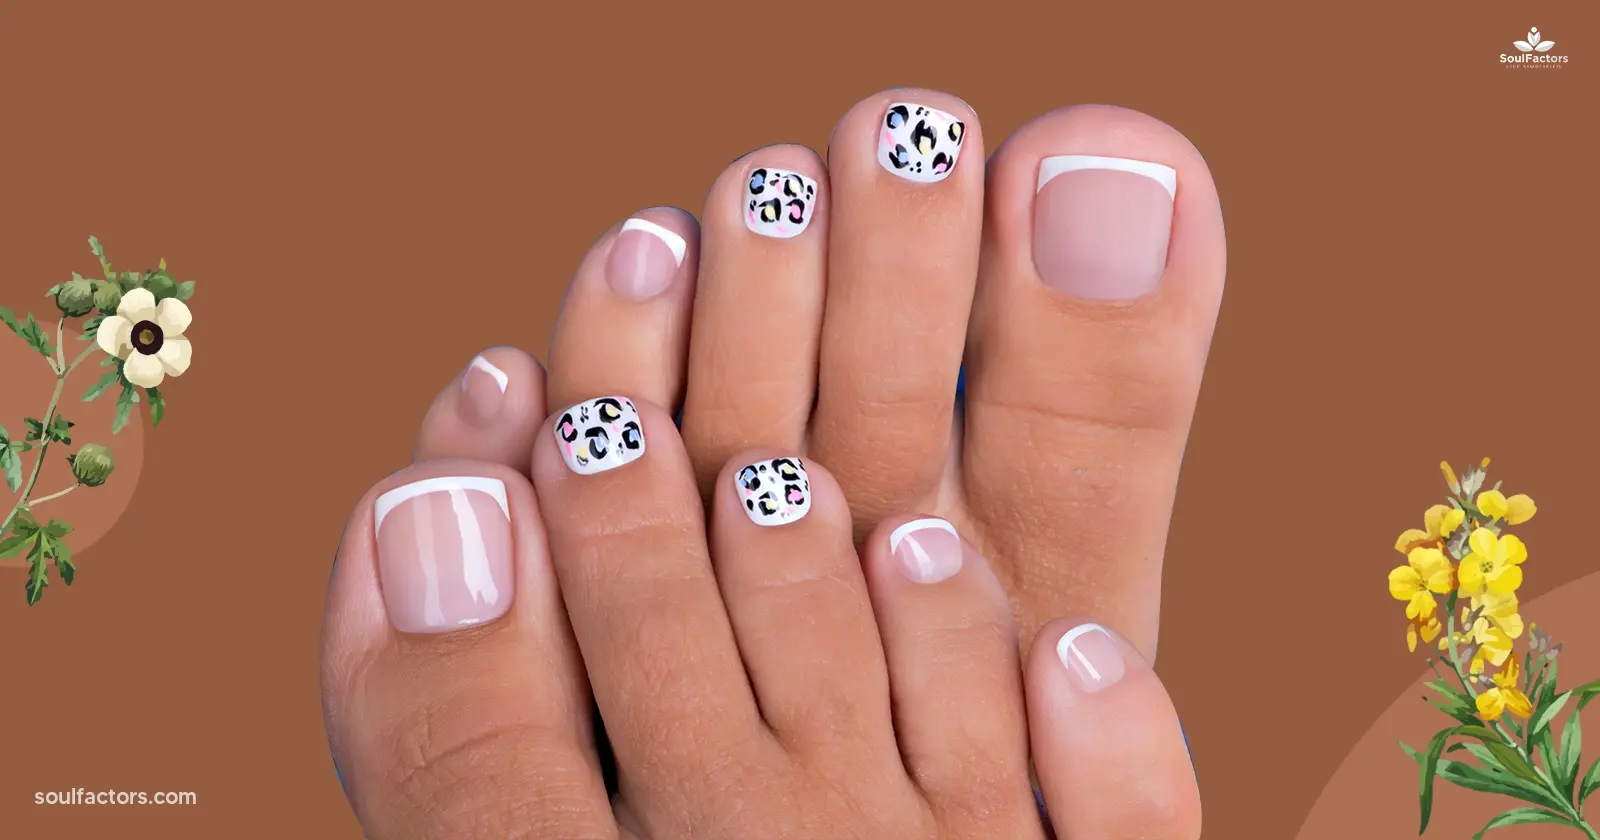 It Toe-tal Glam- up with Toe Nail Art - feature (1)